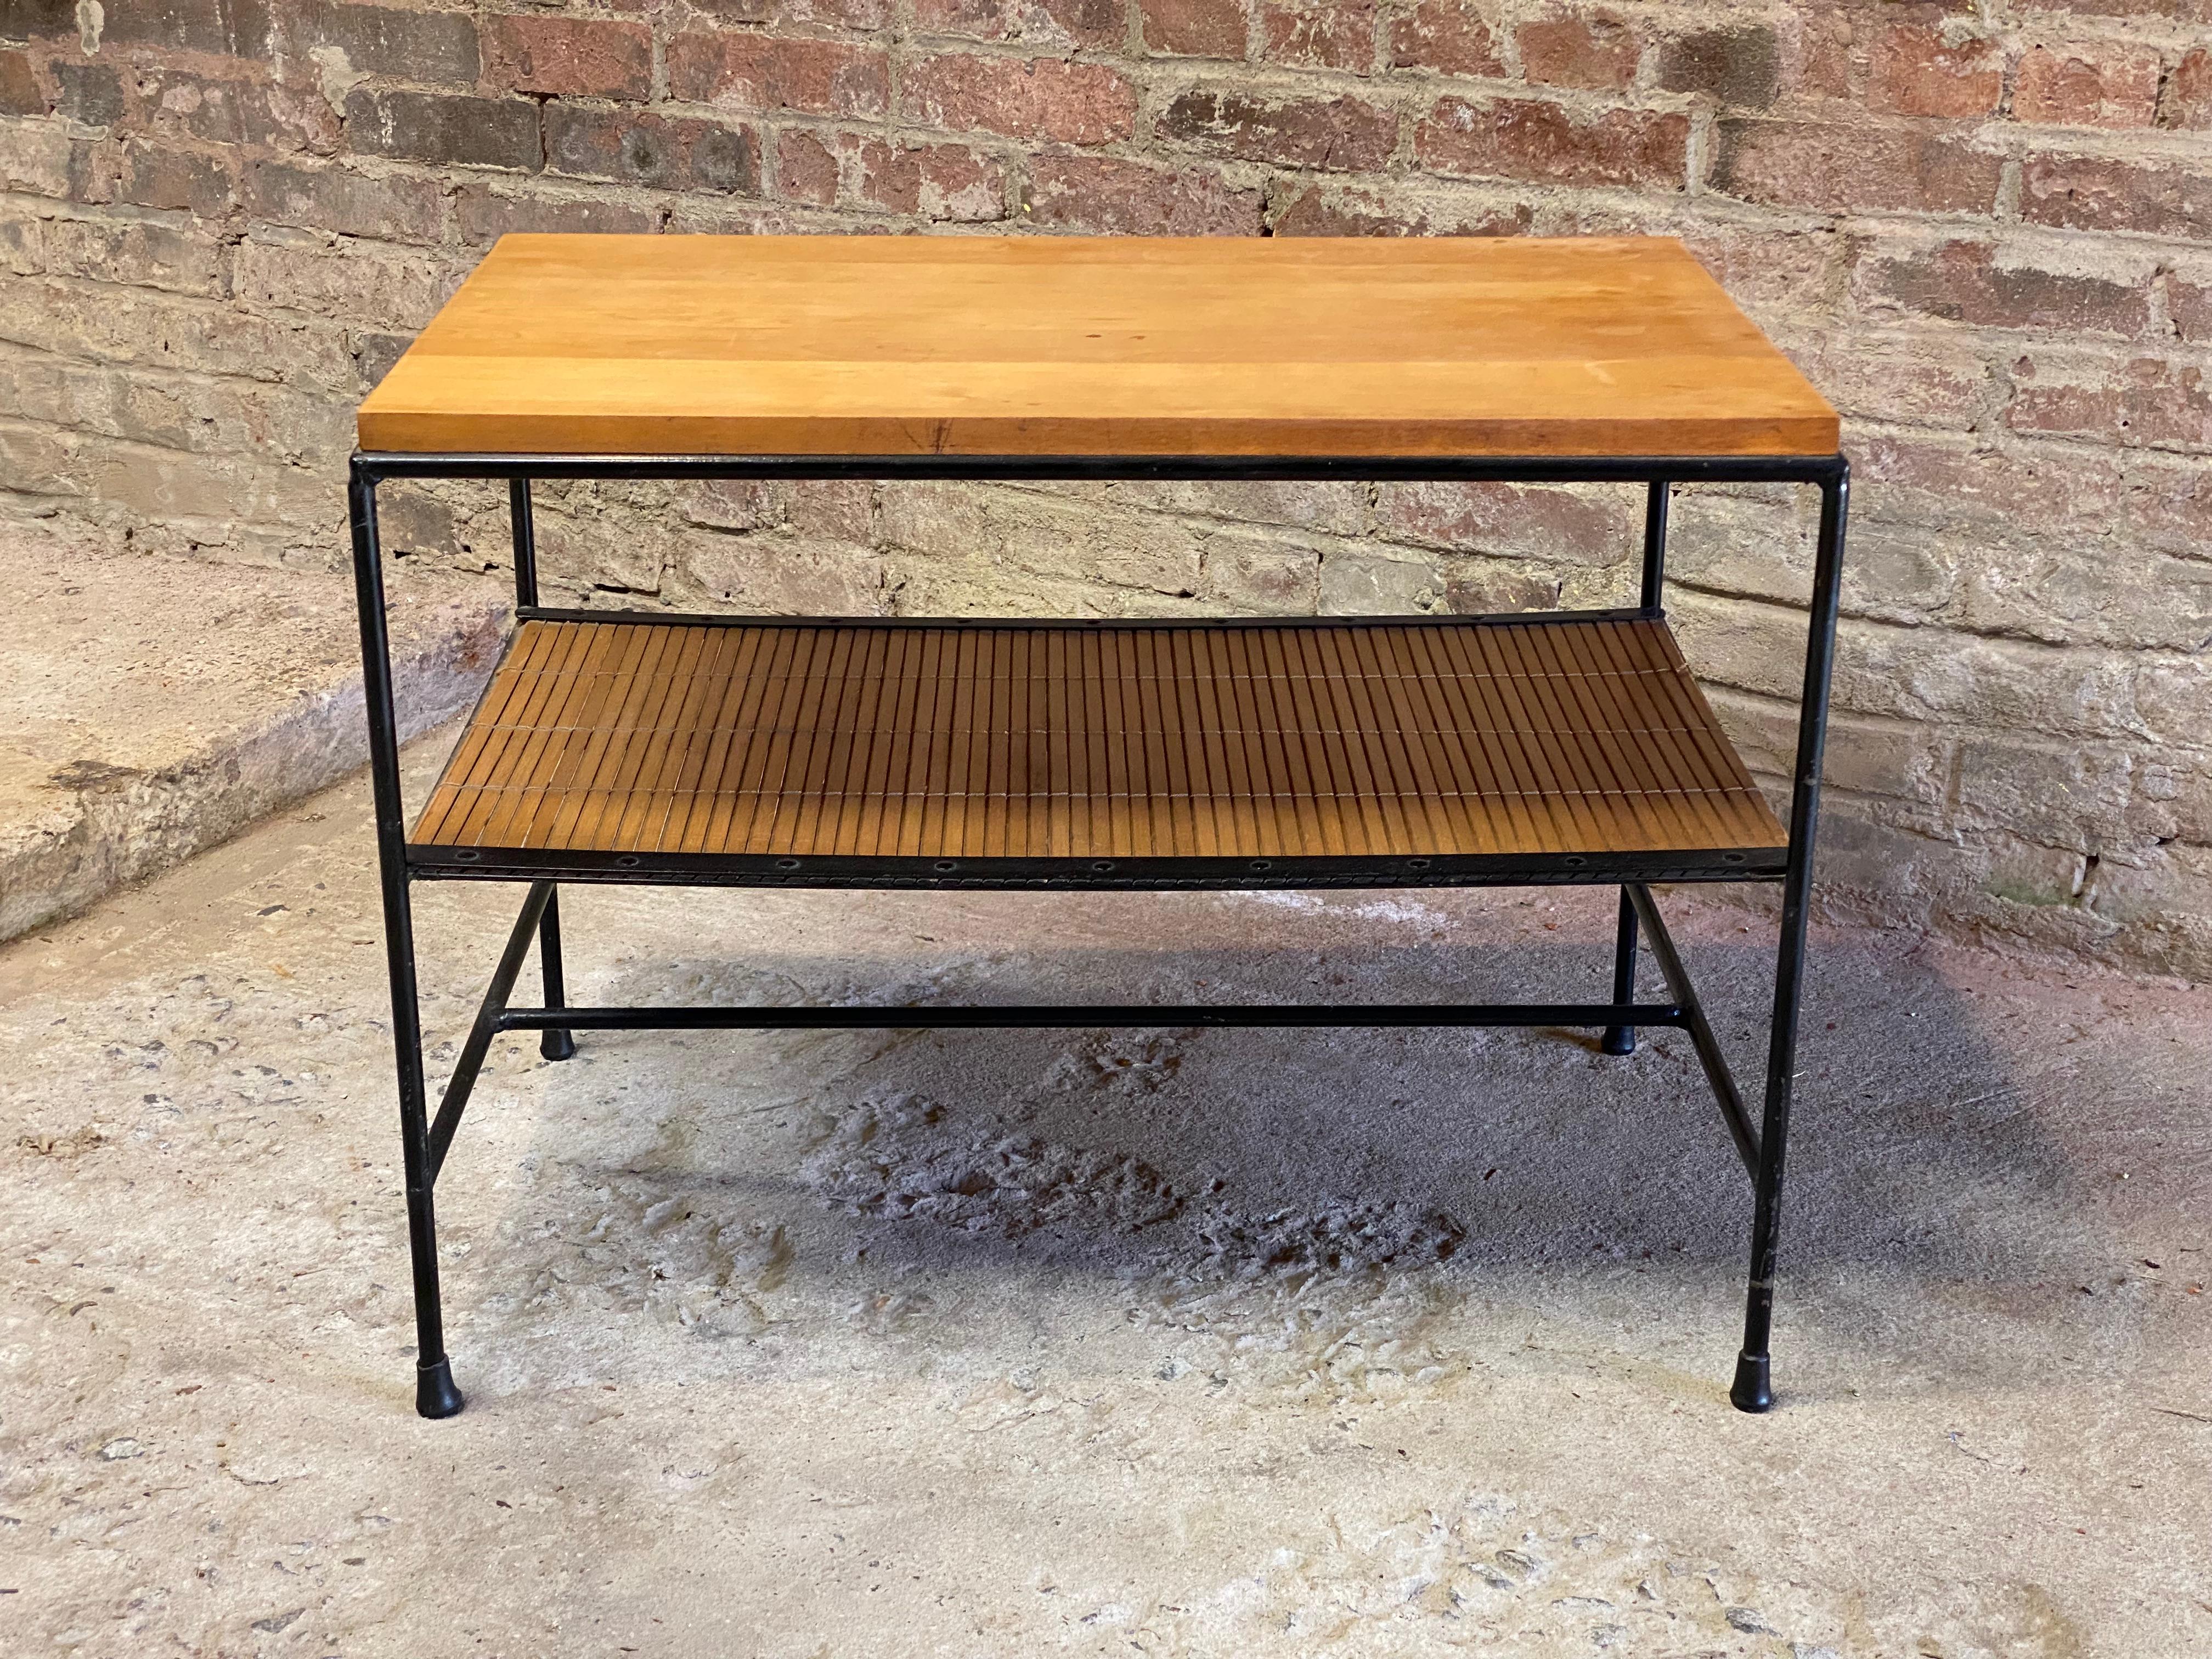 Pair of Planner Group side table designed by Paul McCobb for Winchendon. Circa 1955. Featuring a birch top, iron frame and split reed lower shelf. Good overall honest wear and overall condition with minor scratches to the top. Two minor stains.